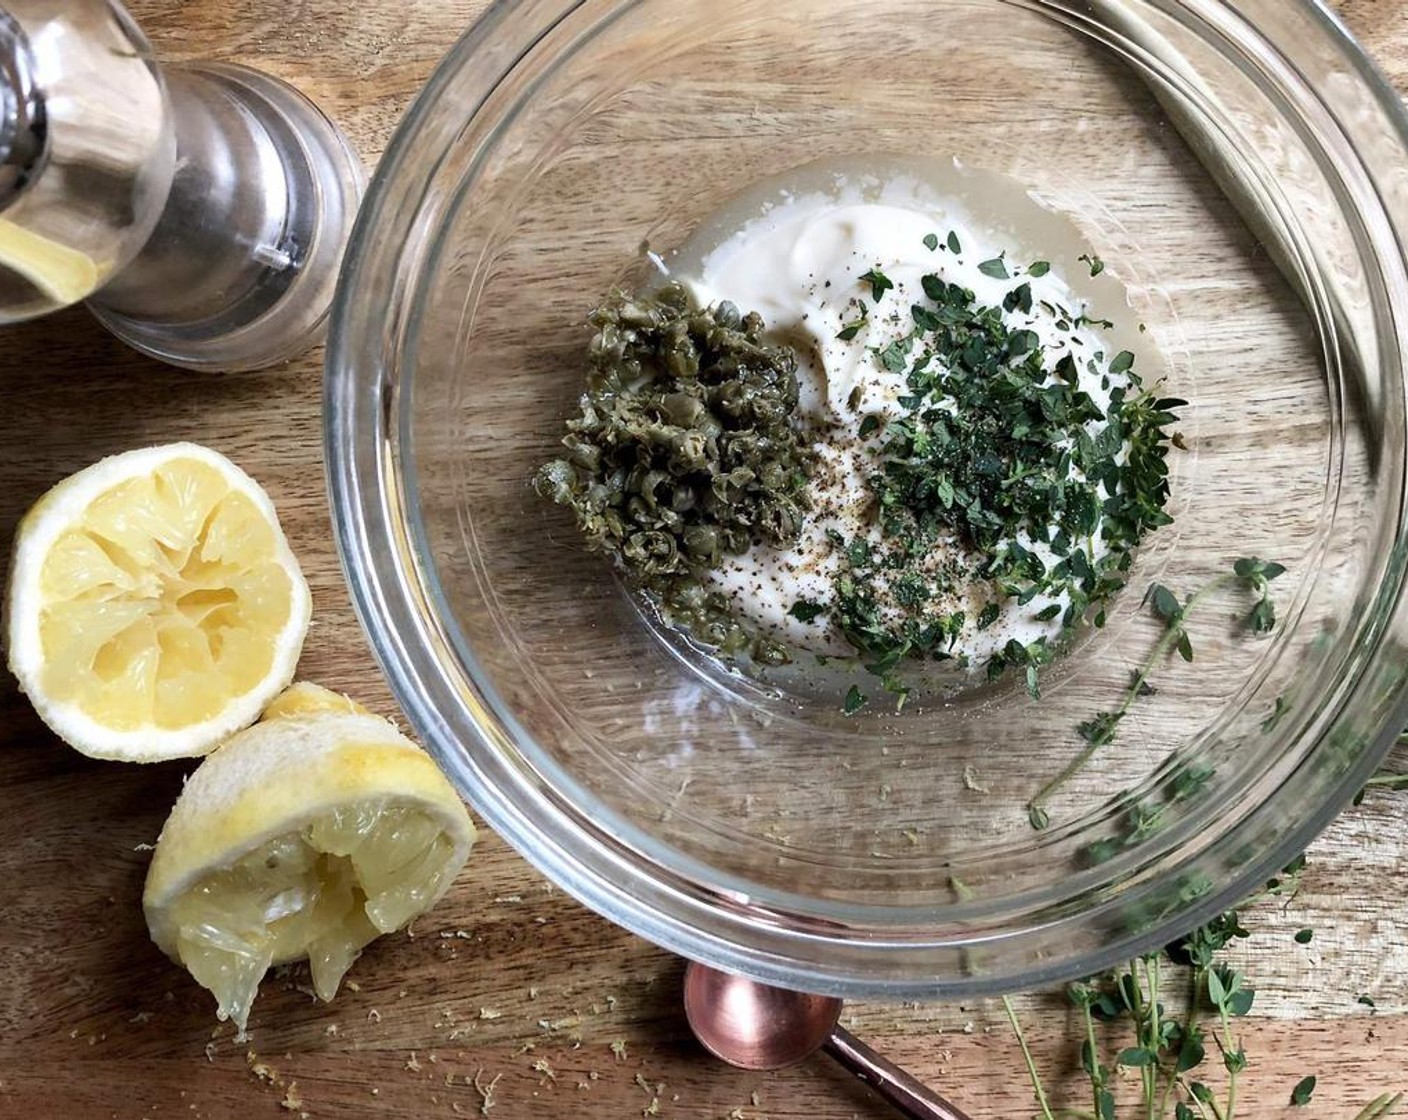 step 2 Meanwhile, for the lemon caper aioli, in a small bowl stir together the Mayonnaise (1/3 cup), 2 tablespoons Lemon (1) juice, Capers (1 Tbsp), Fresh Thyme (1 tsp) and Ground Black Pepper (1/8 tsp). Mix well and set aside.